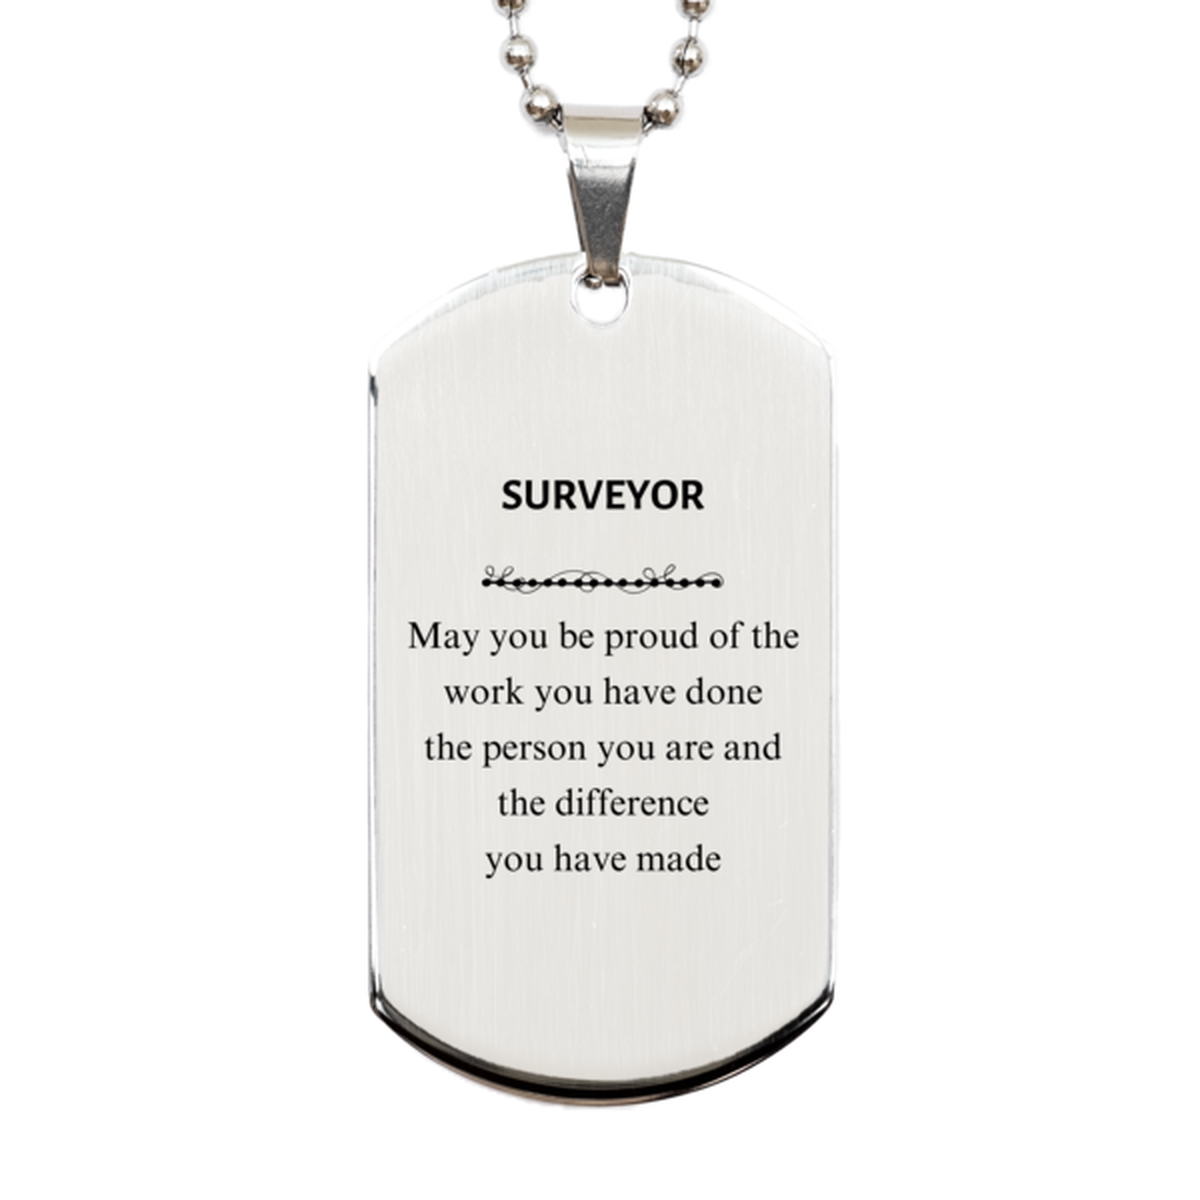 Surveyor May you be proud of the work you have done, Retirement Surveyor Silver Dog Tag for Colleague Appreciation Gifts Amazing for Surveyor